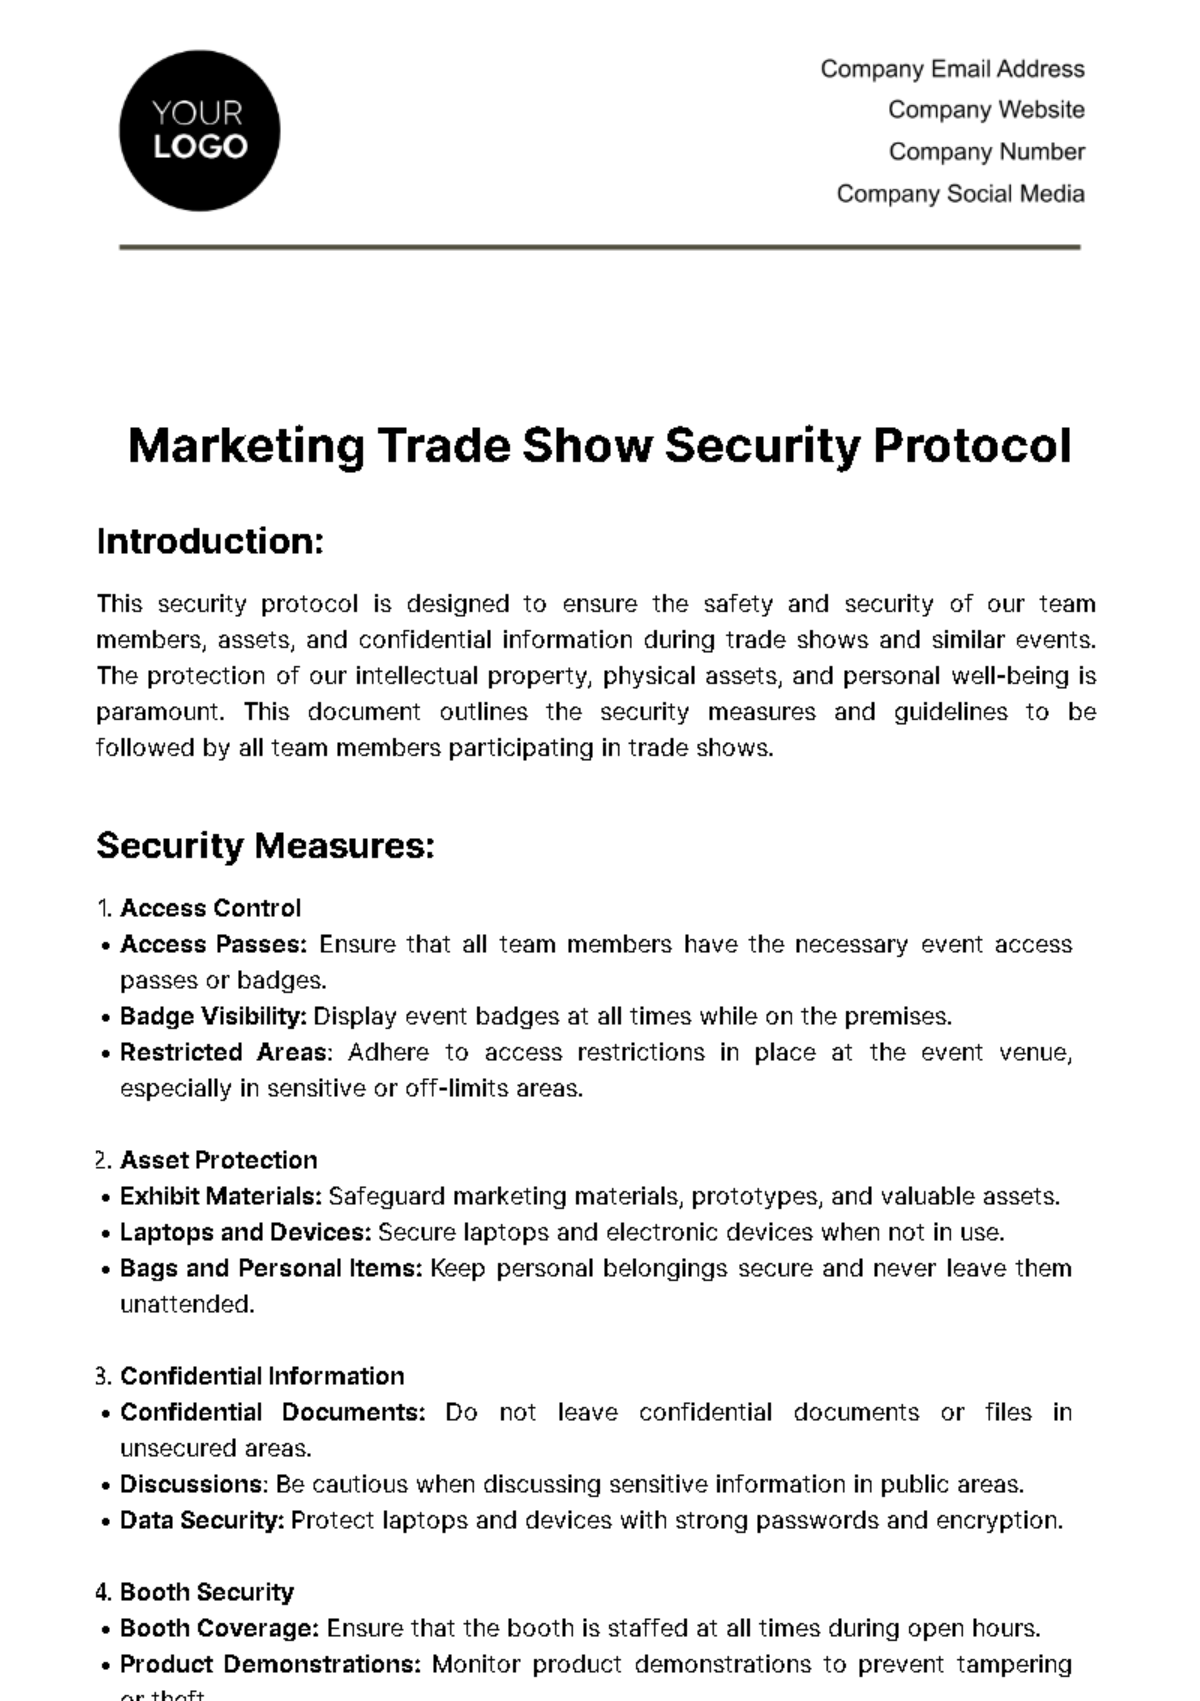 Free Marketing Trade Show Security Protocol Template